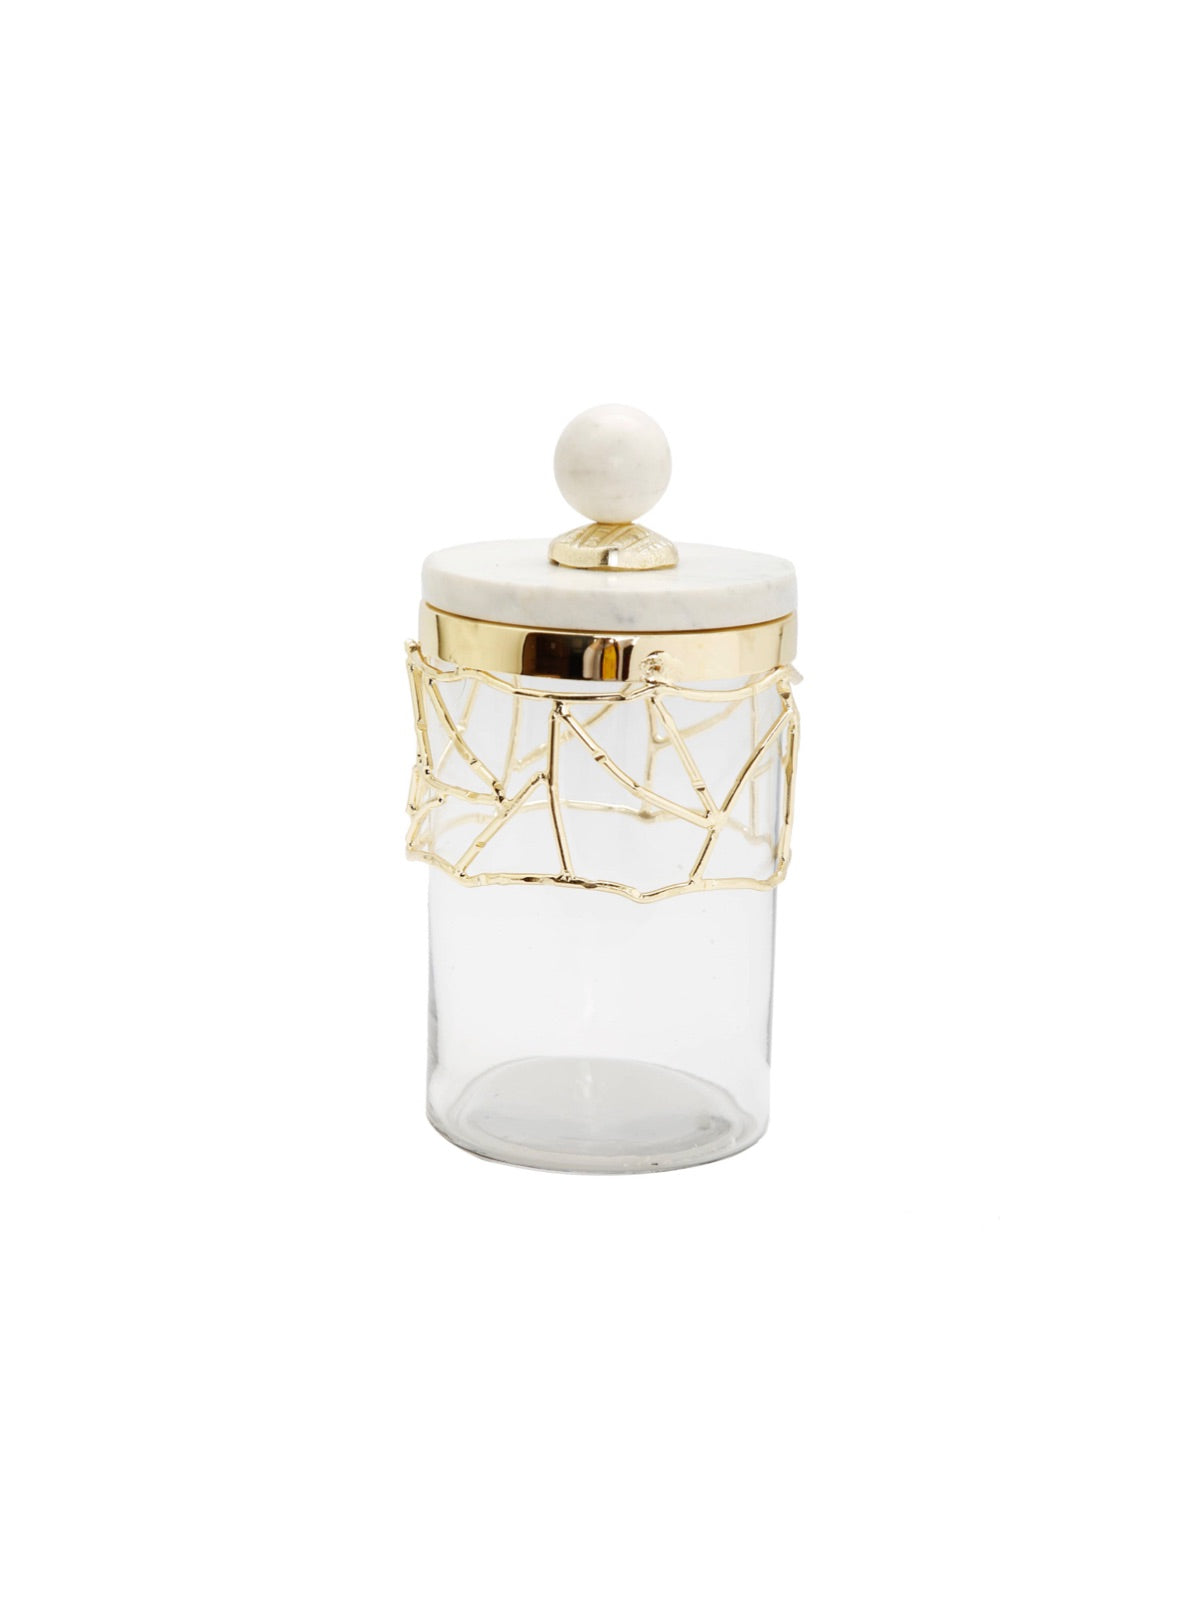 8H Luxury Kitchen Glass Canister With Gold Mesh Design and Marble Lid - KYA Home Decor.